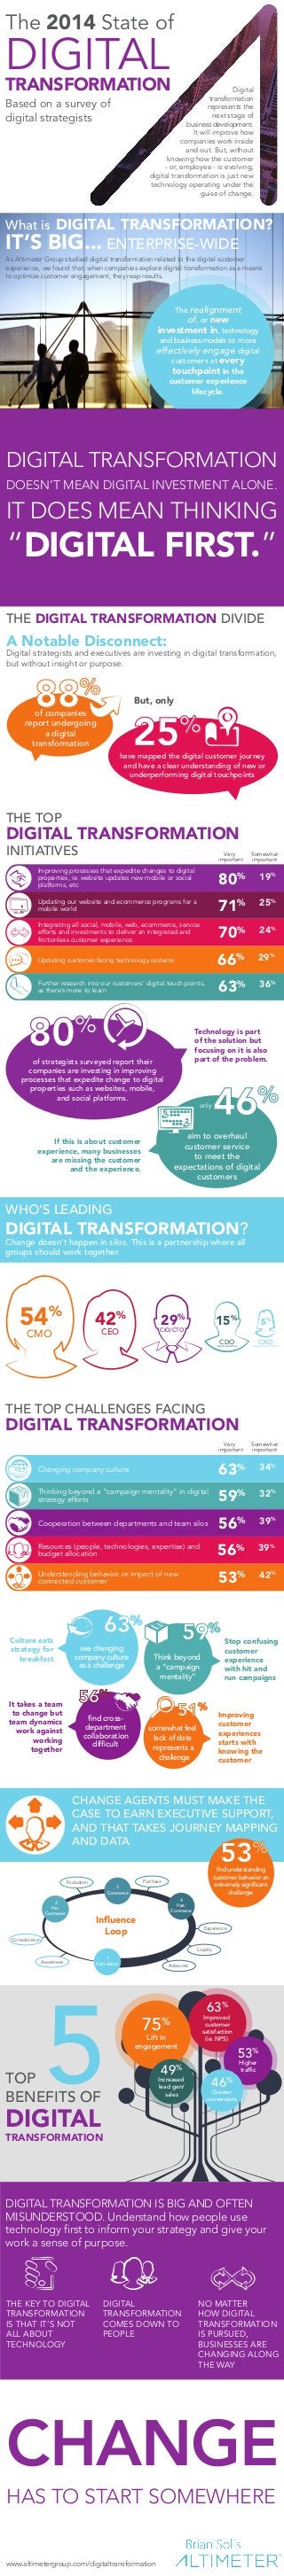 [Infographic] The 2014 State of Digital Transformation